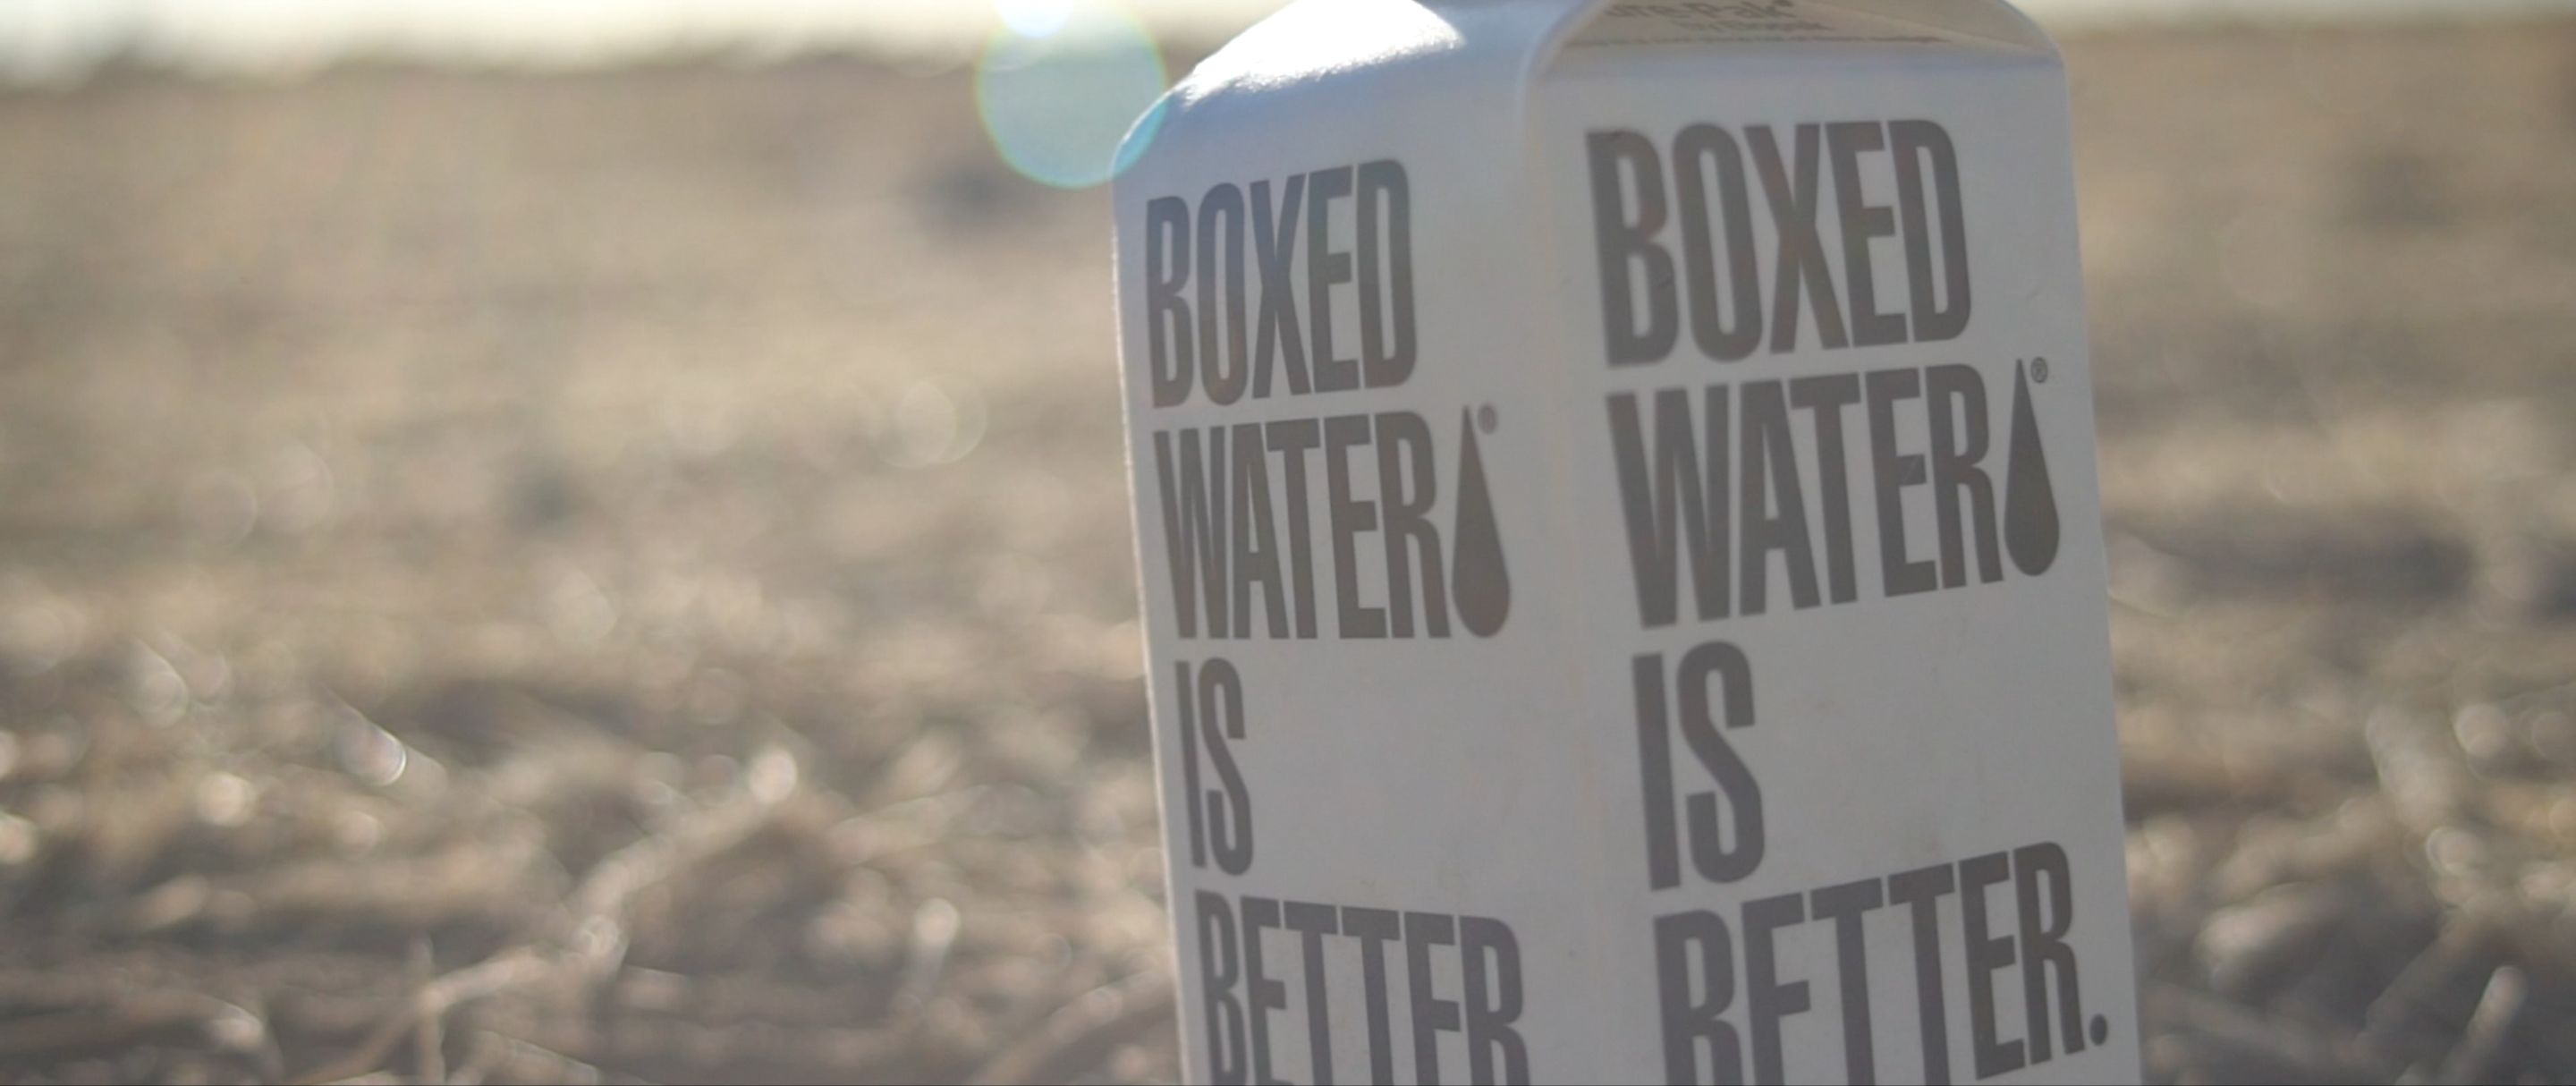 BoxedWater